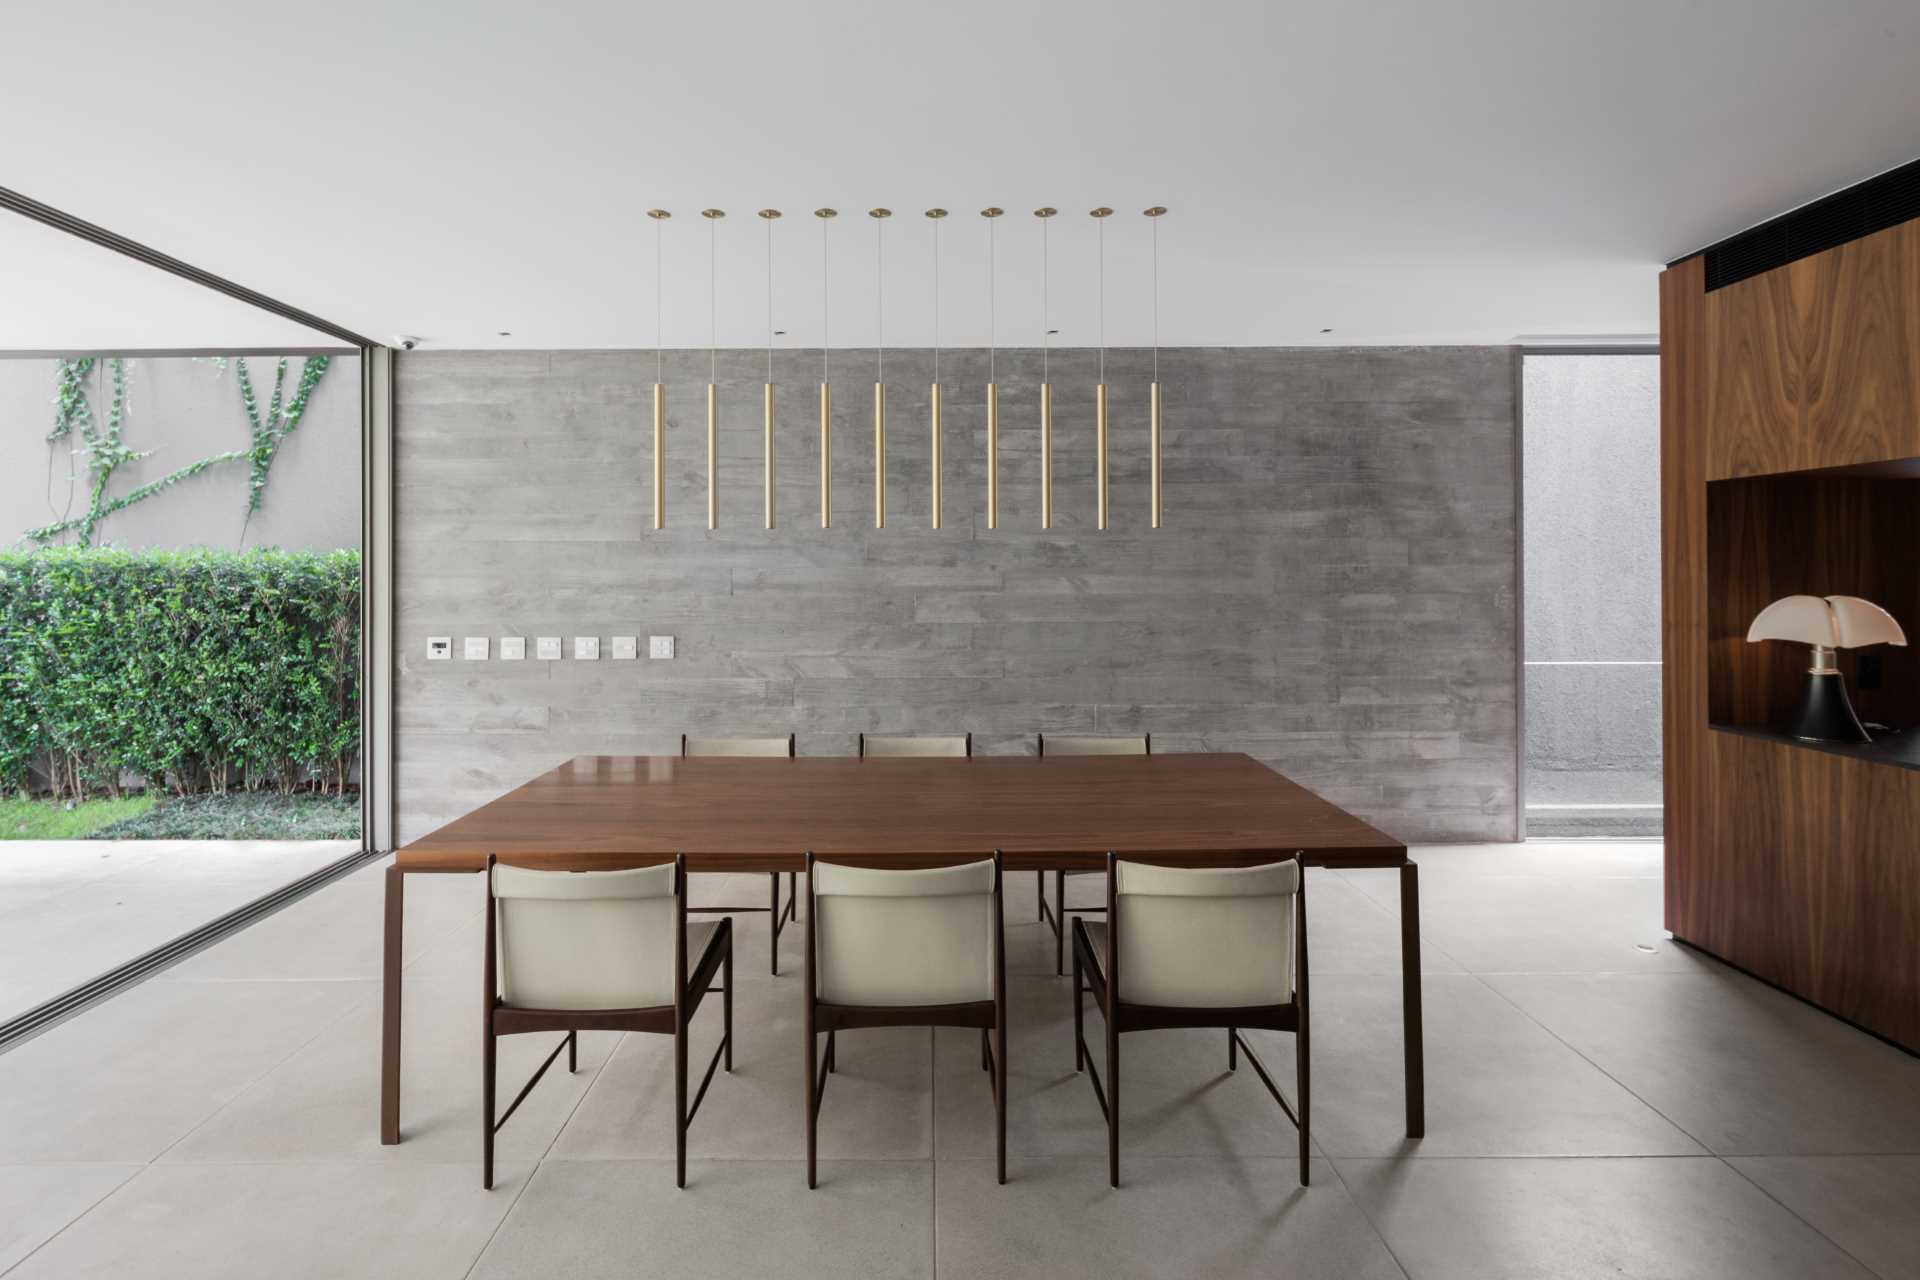 A concrete wall in this modern dining room, which has been left bare, and allows the minimalist pendant lights above the dining table to stand out.